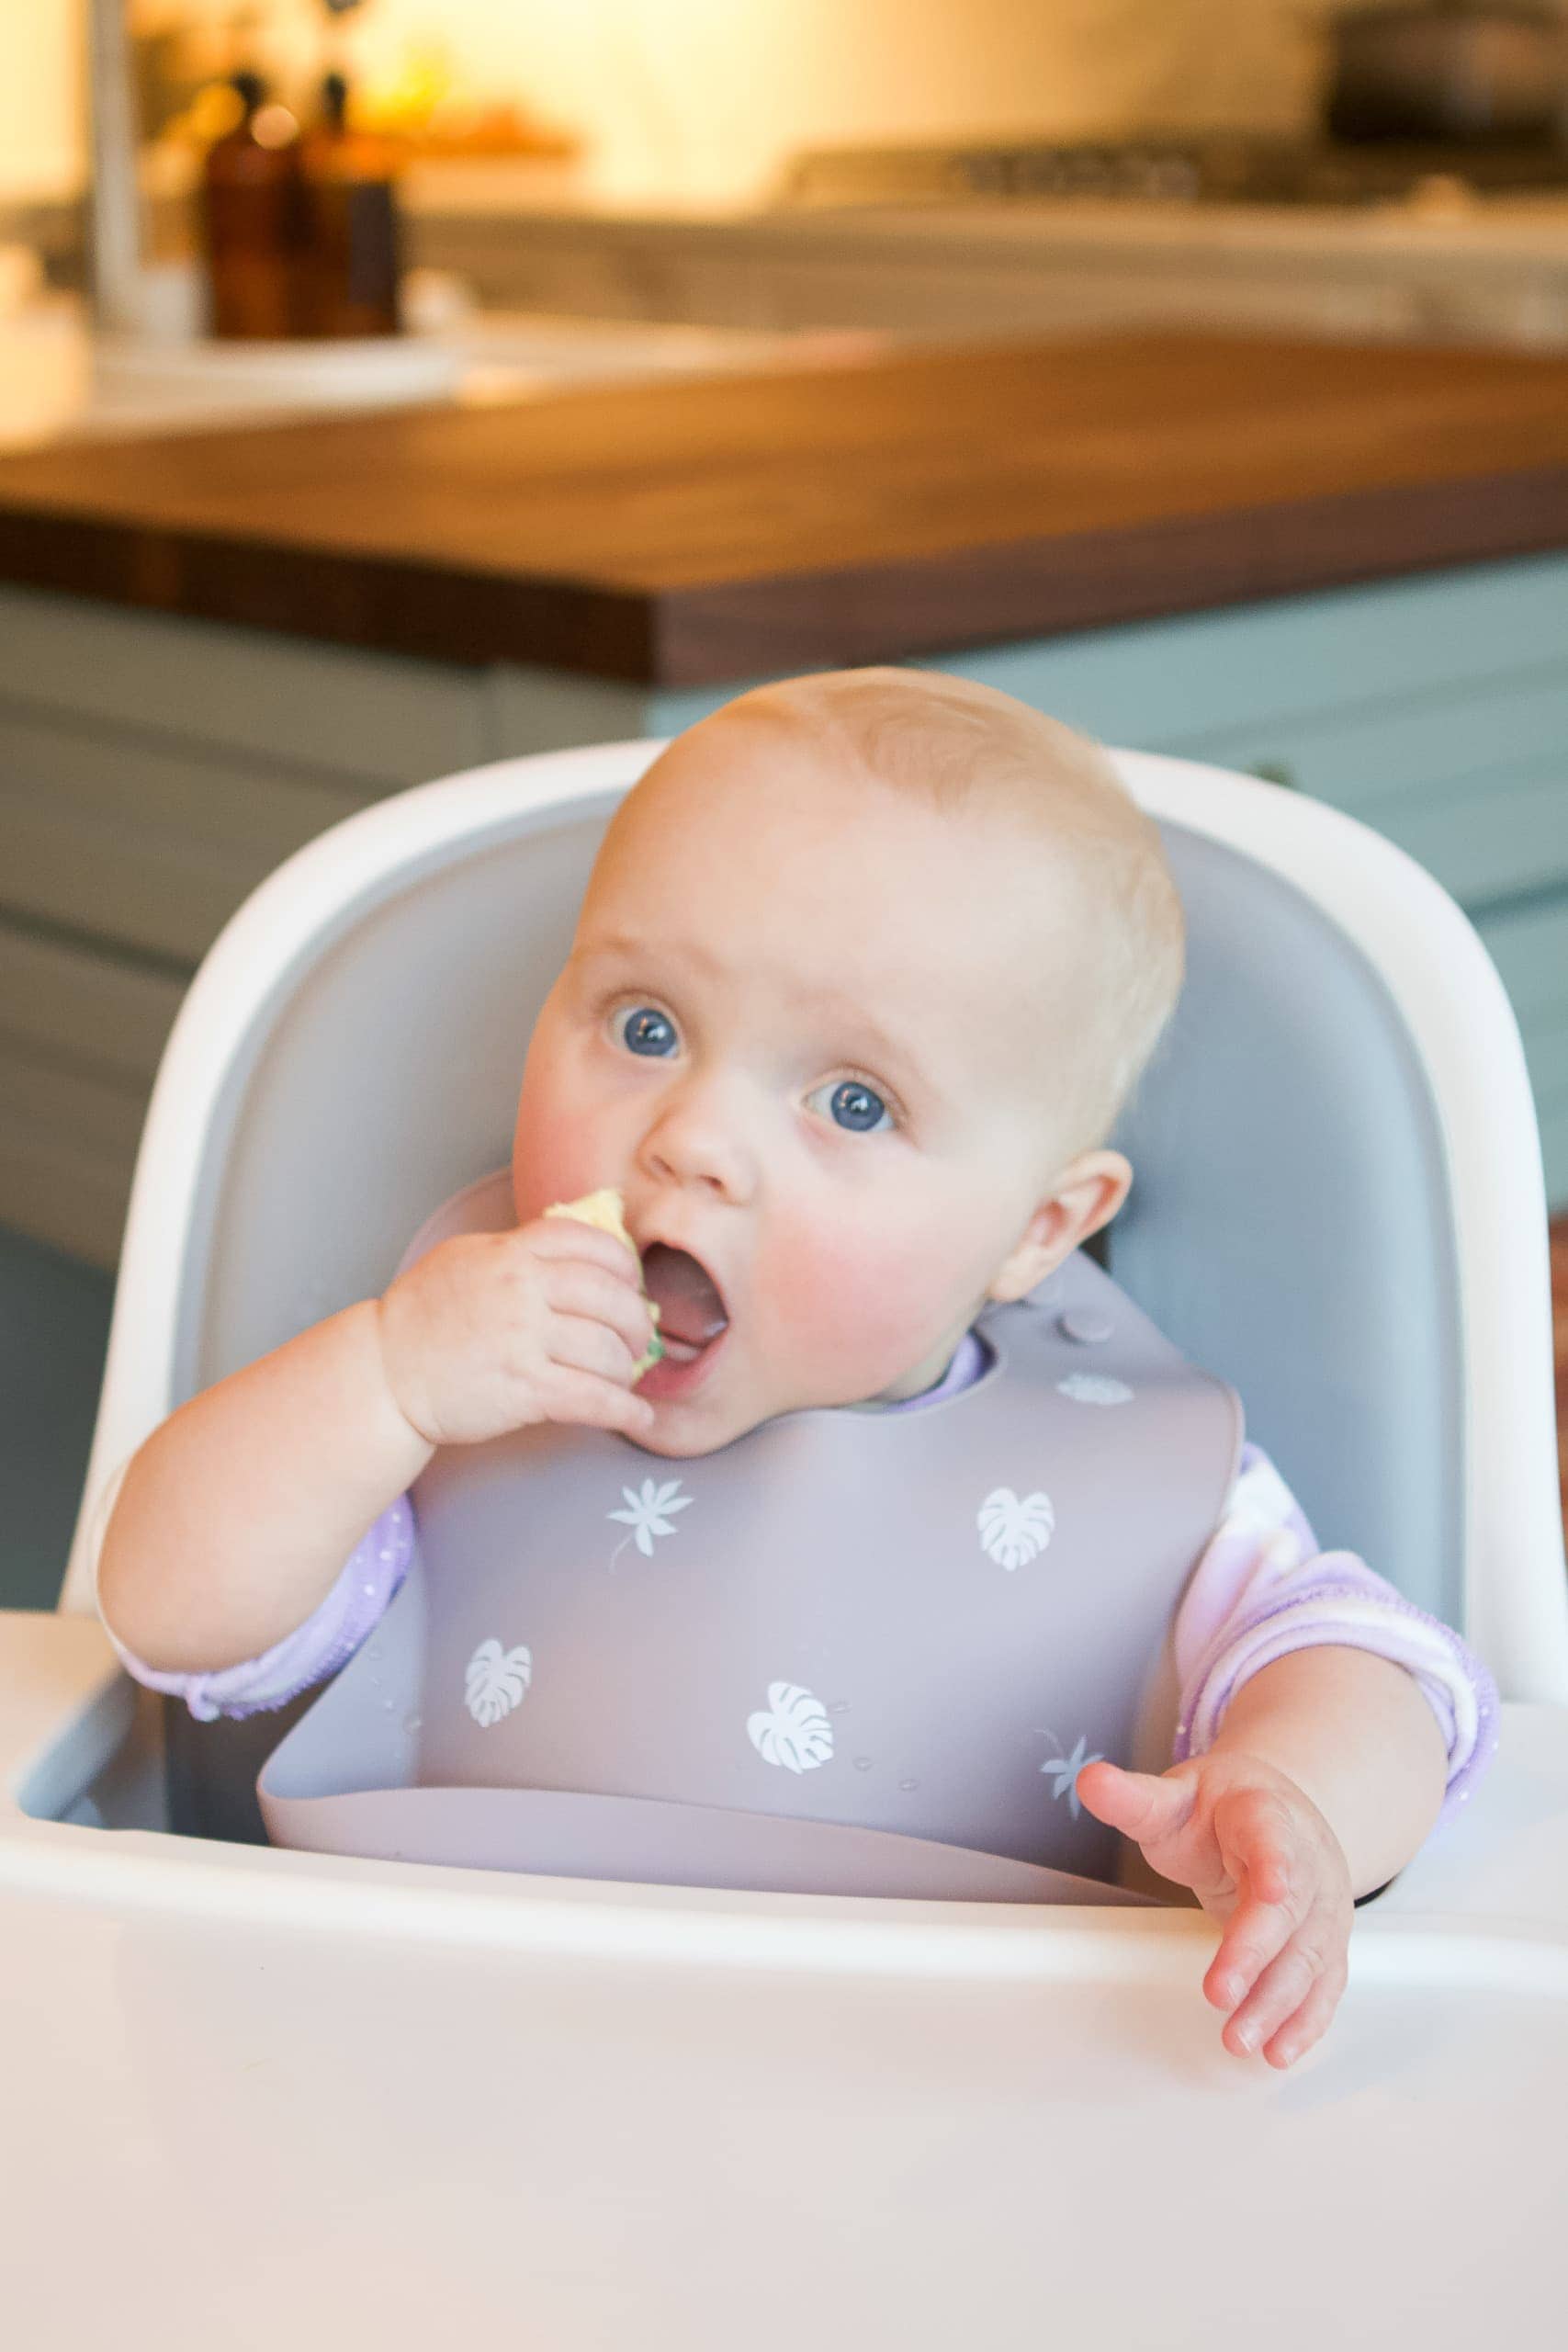 Rory's experience with baby led weaning